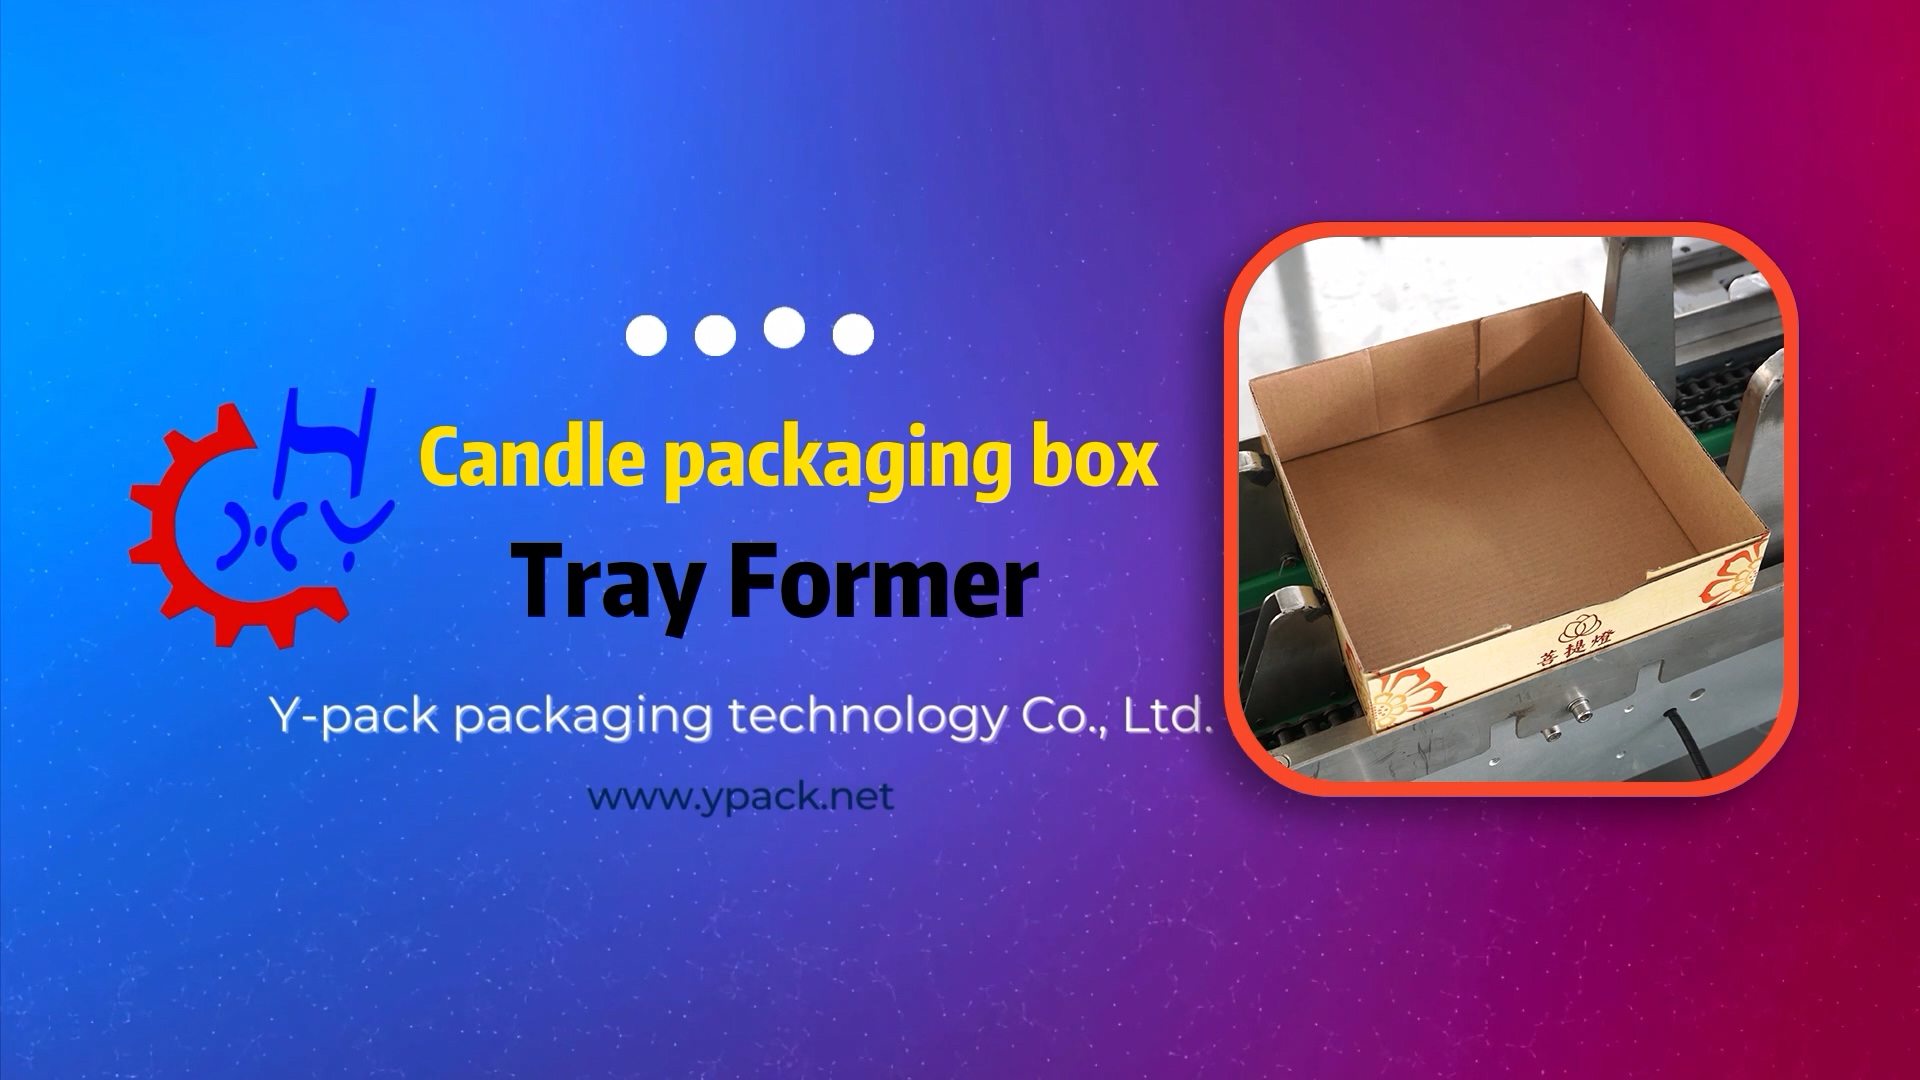 How to Make a Paper Tray,Tray Former for Candle Packaging Box